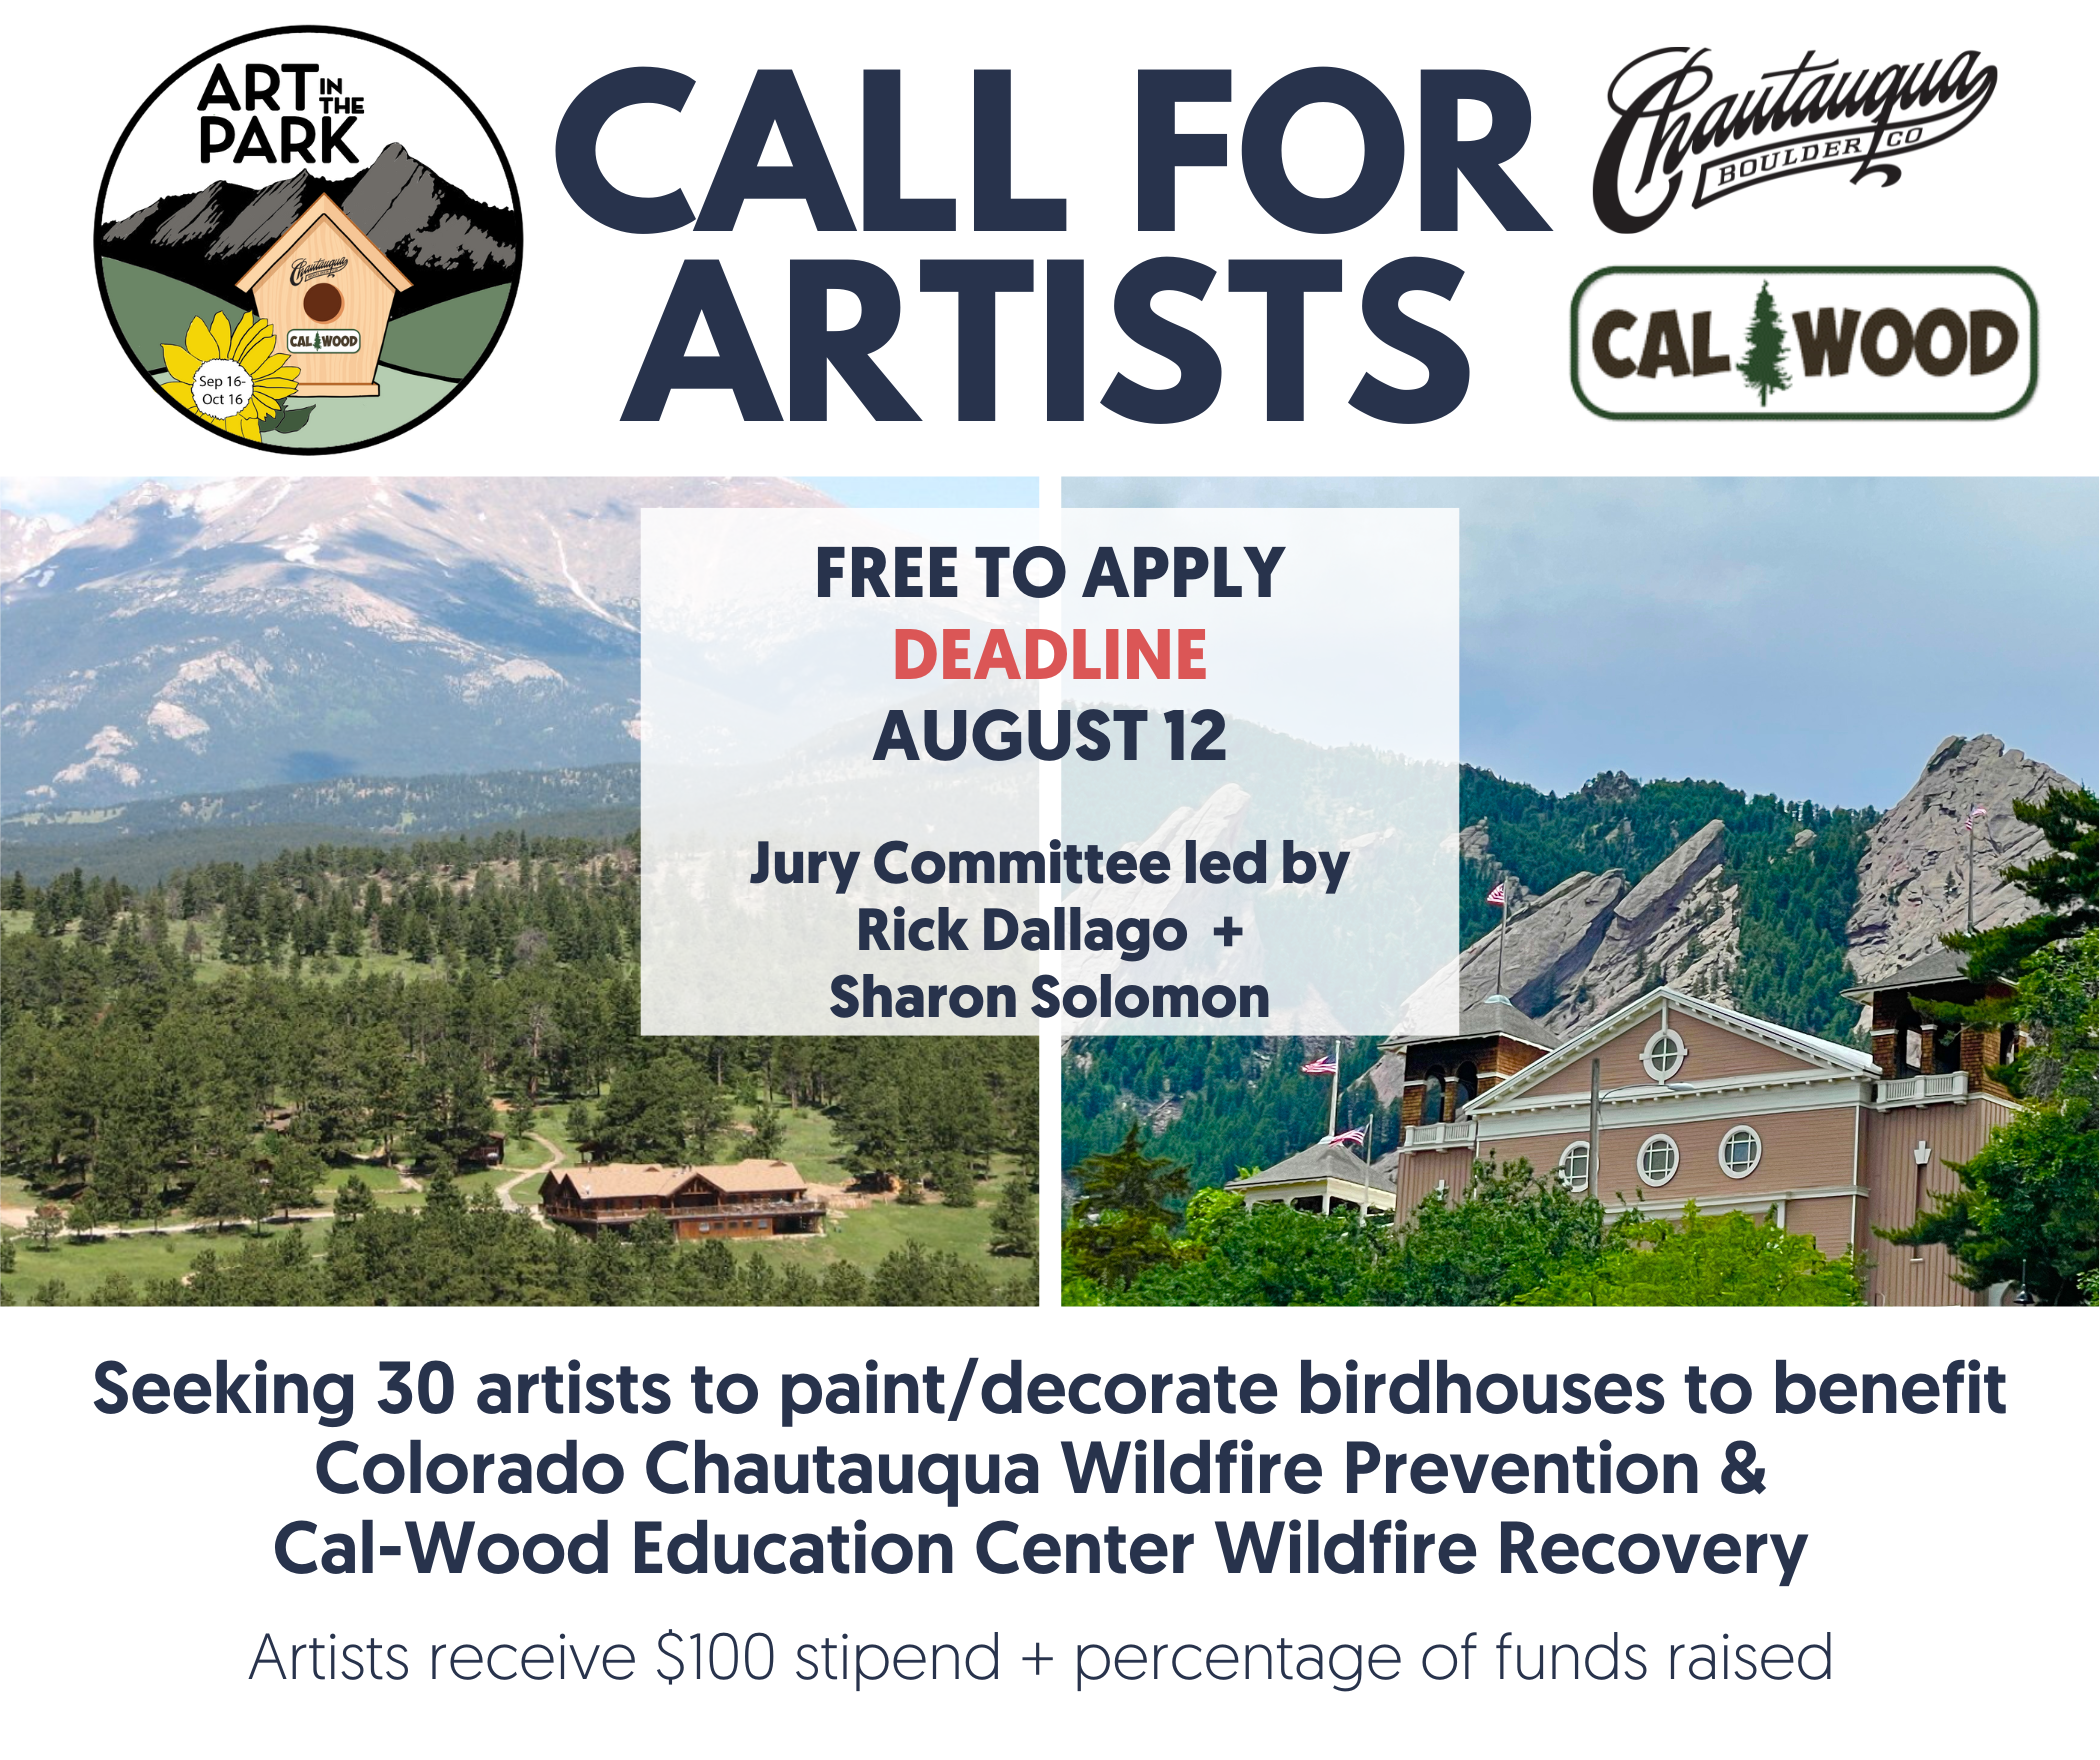 Image reads: Chautauqua and Cal-Wood Art in the park. Call For Artists. Free to apply. Deadline August 12. Jury committee led by Rick Dallago and Sharon Solomon. Seeking 30 artists to paint/decorate birdhouses to benefit Colorado Chautauqua Wildfire prevention and Cal-Wood Education Center Wildfire Recovery. Artists receive $100 stipend and percentage of funds raised